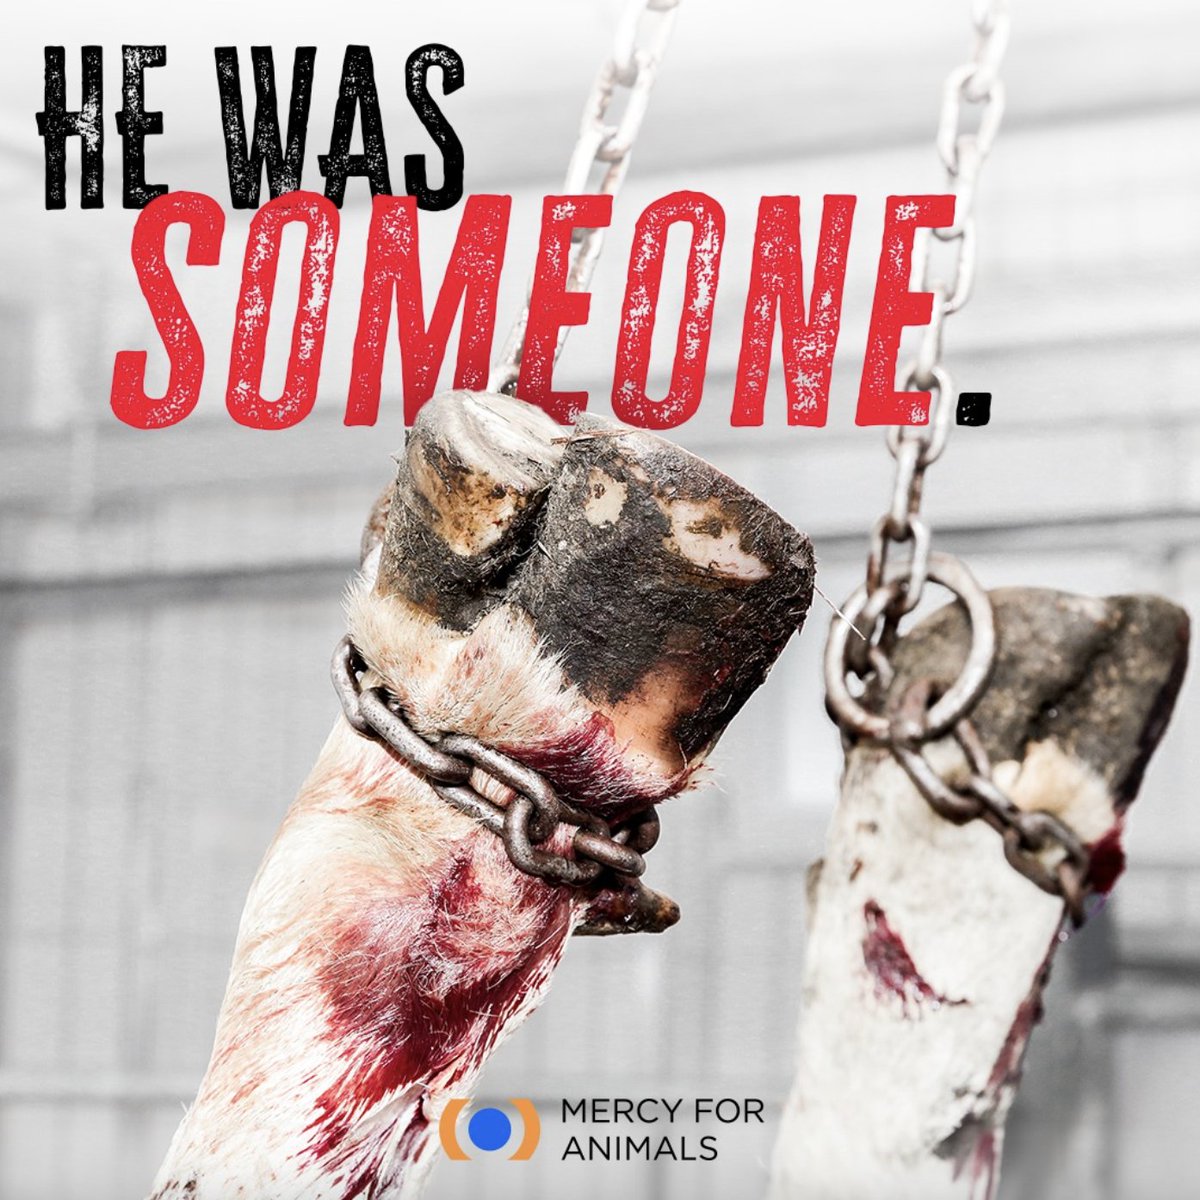 Just like us, animals raised for food are unique individuals who can feel pain and fear. Show compassion for them by choosing plant-based food.

Download our free How to Eat Veg Guide at mercyforanimals.org/hev/